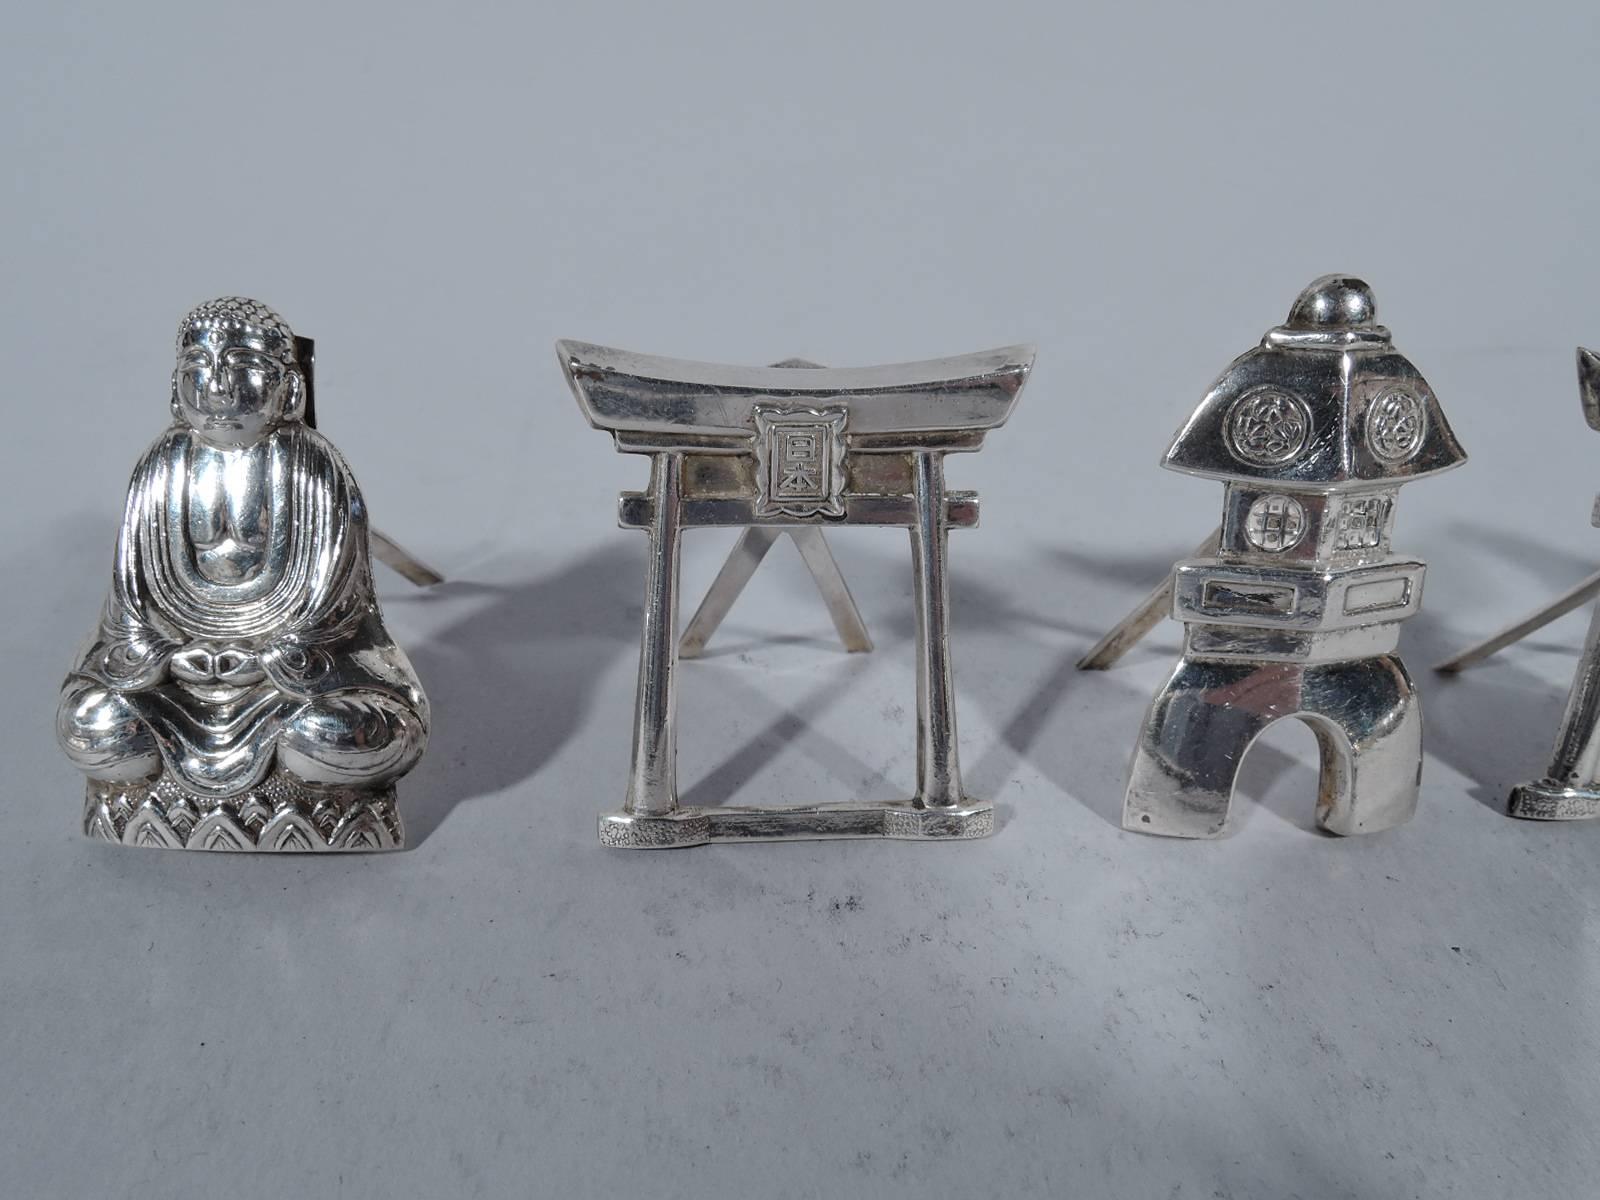 Set of Japanese silver place card holders. Six holders in four designs with motifs that include Buddha and pagoda. A fun foray into postwar exoticism. Each hallmarked “Sterling 950”. 

Dimensions (largest): H 1 5/8 x W 7/8 in. Total weight: 1.5